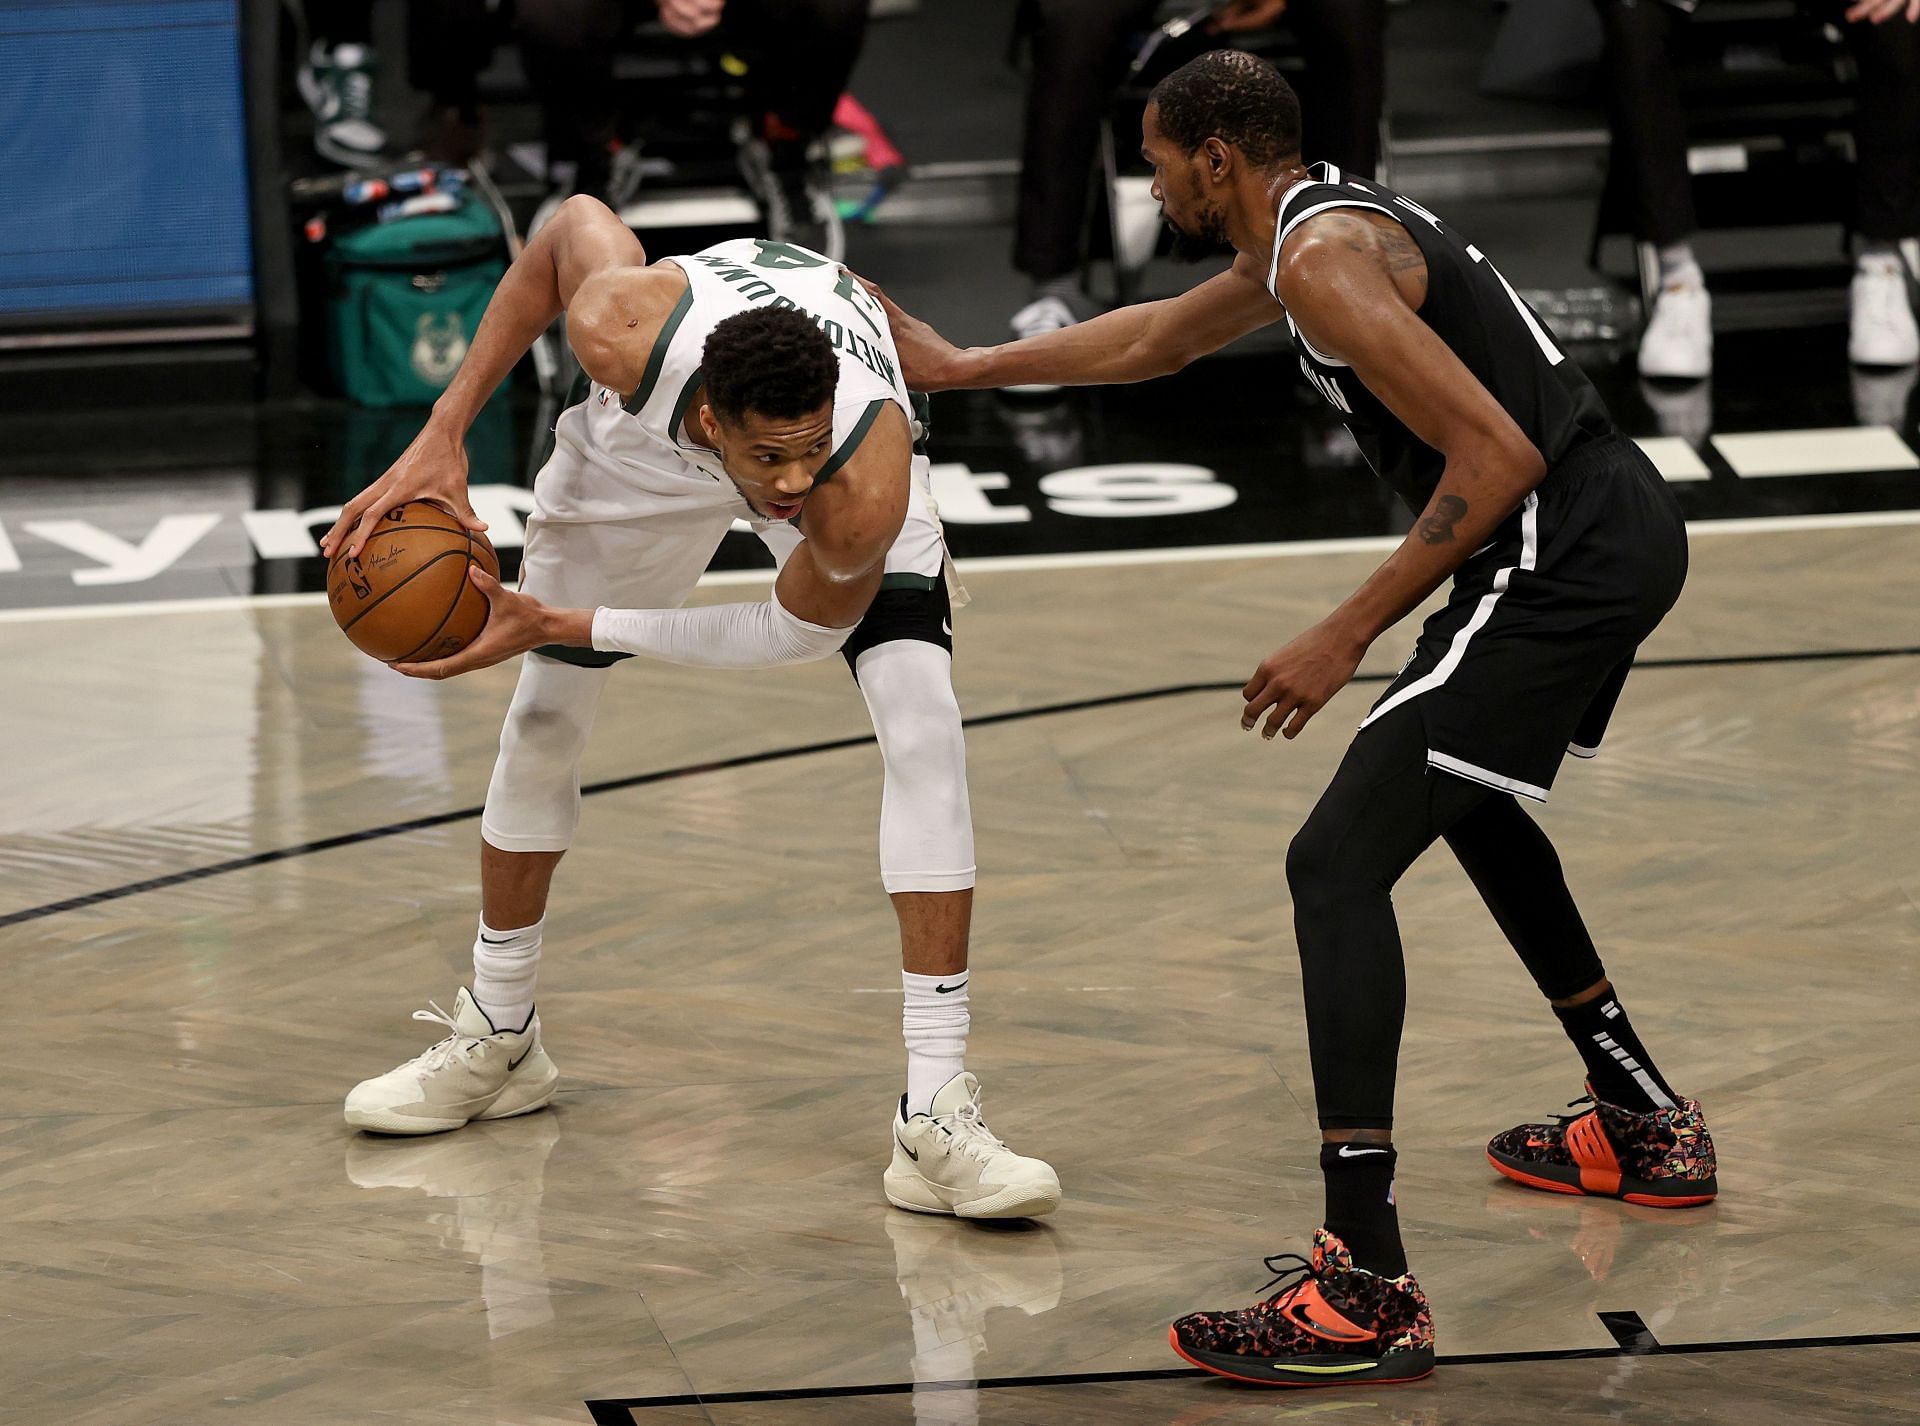 Giannis Antetokounmpo and Kevin Durant will renew their rivalry as the Brooklyn Nets and Milwaukee Bucks face off to open the 2021-22 NBA season